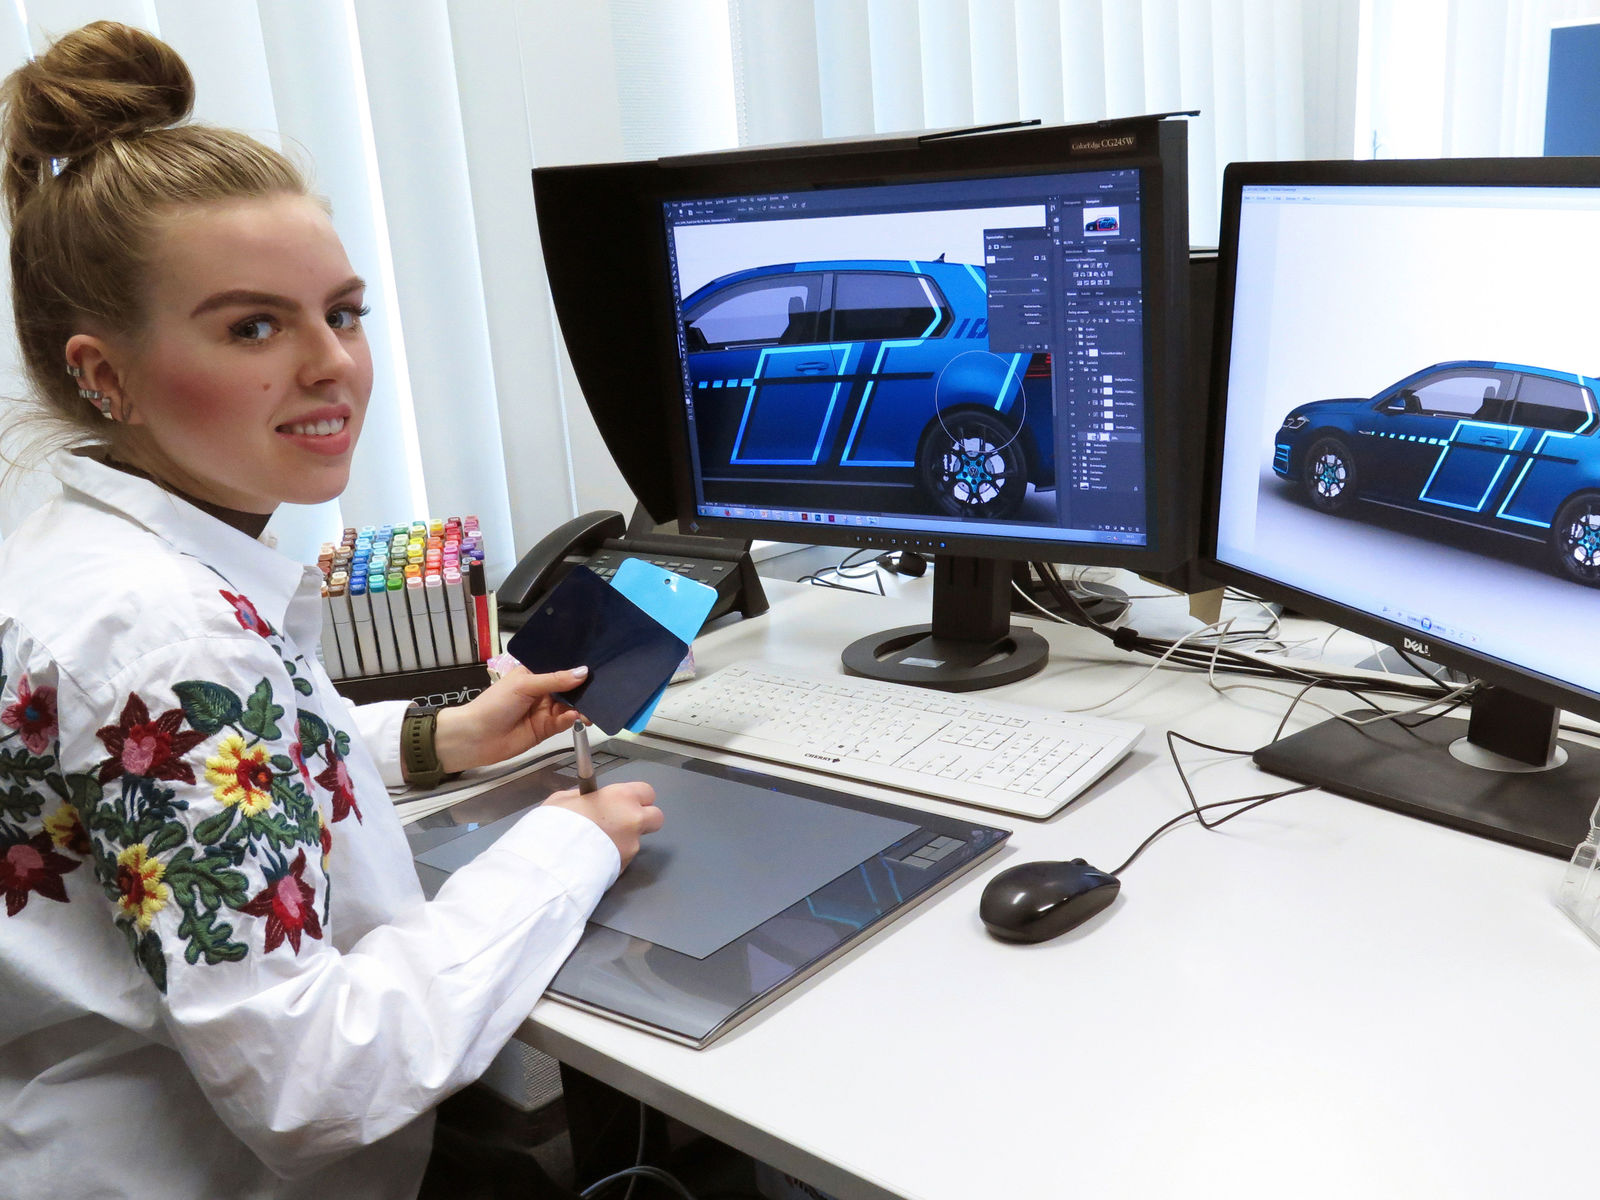 The Wörthersee GTI 2017: Apprentices design unique car fast and efficiently using digital technologies